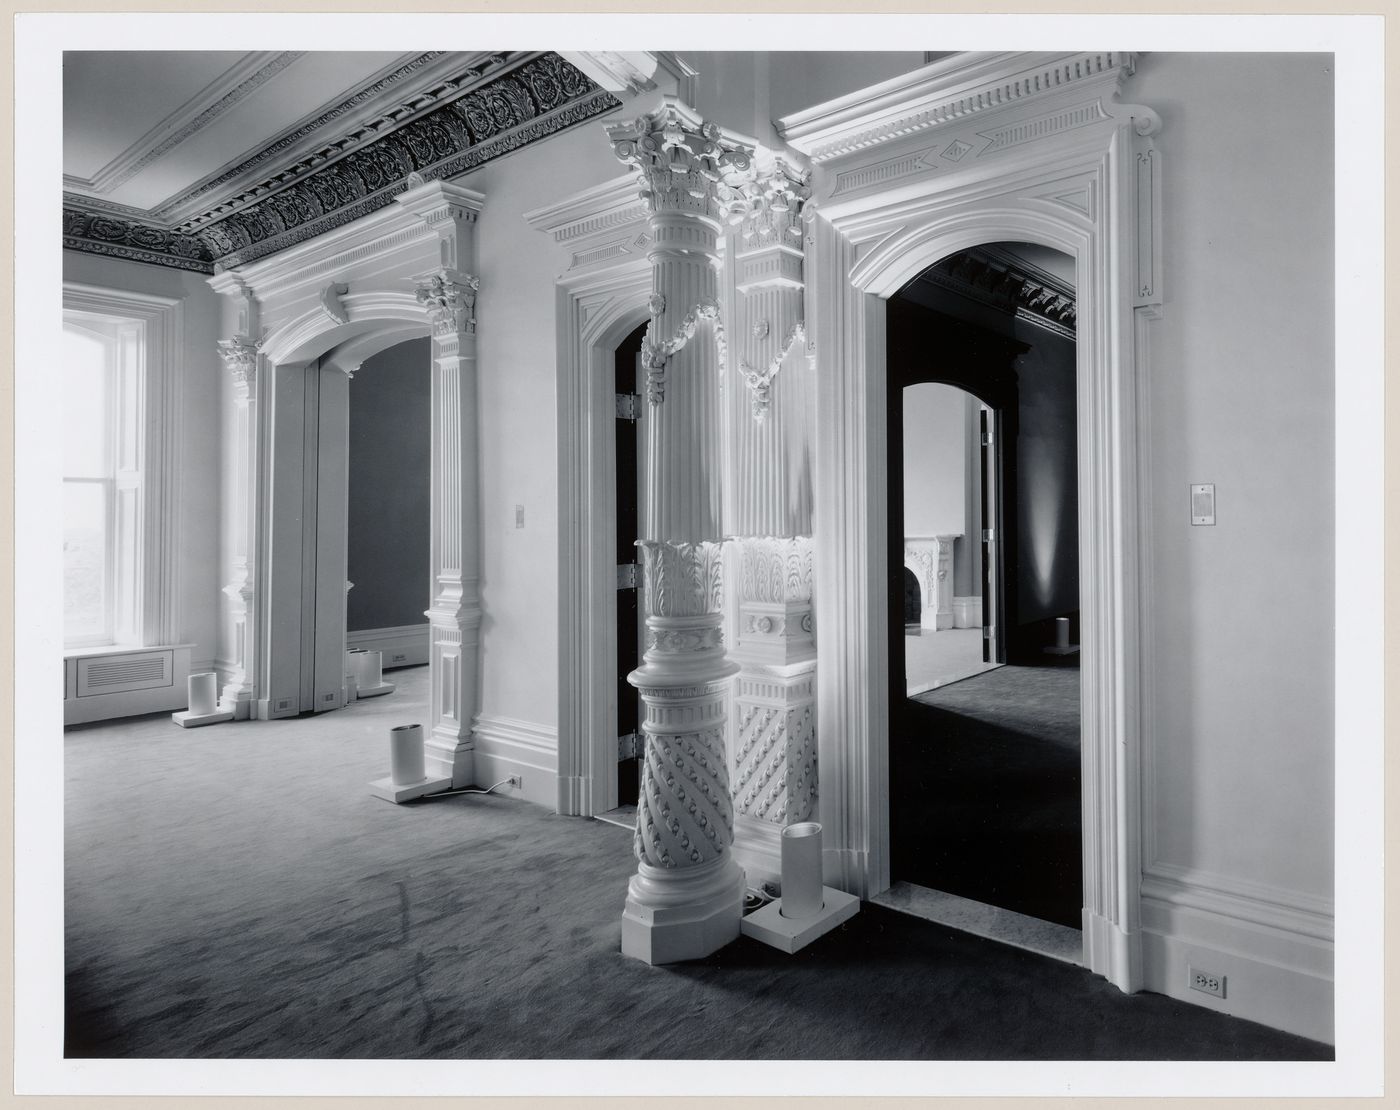 Interior view of the reception rooms showing doorways and a column, Shaughnessy House under renovation, Montréal, Québec